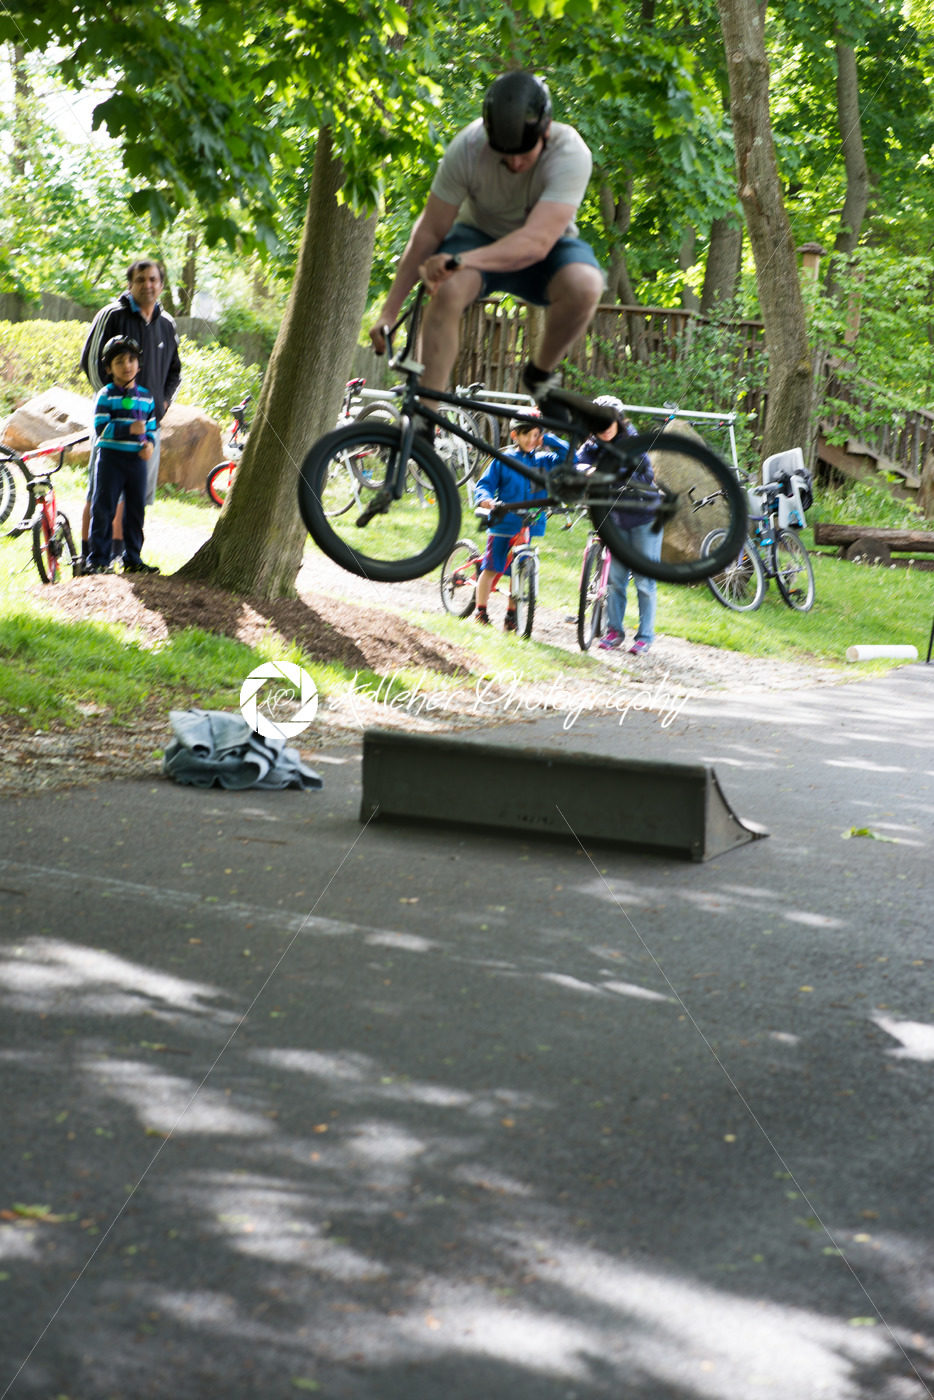 RADNOR TOWNSHIP, PA – MAY 7: BMX Stunt Performance by Chris Aceto at the Radnor Township Bike Rodeo on May 7, 2017 - Kelleher Photography Store